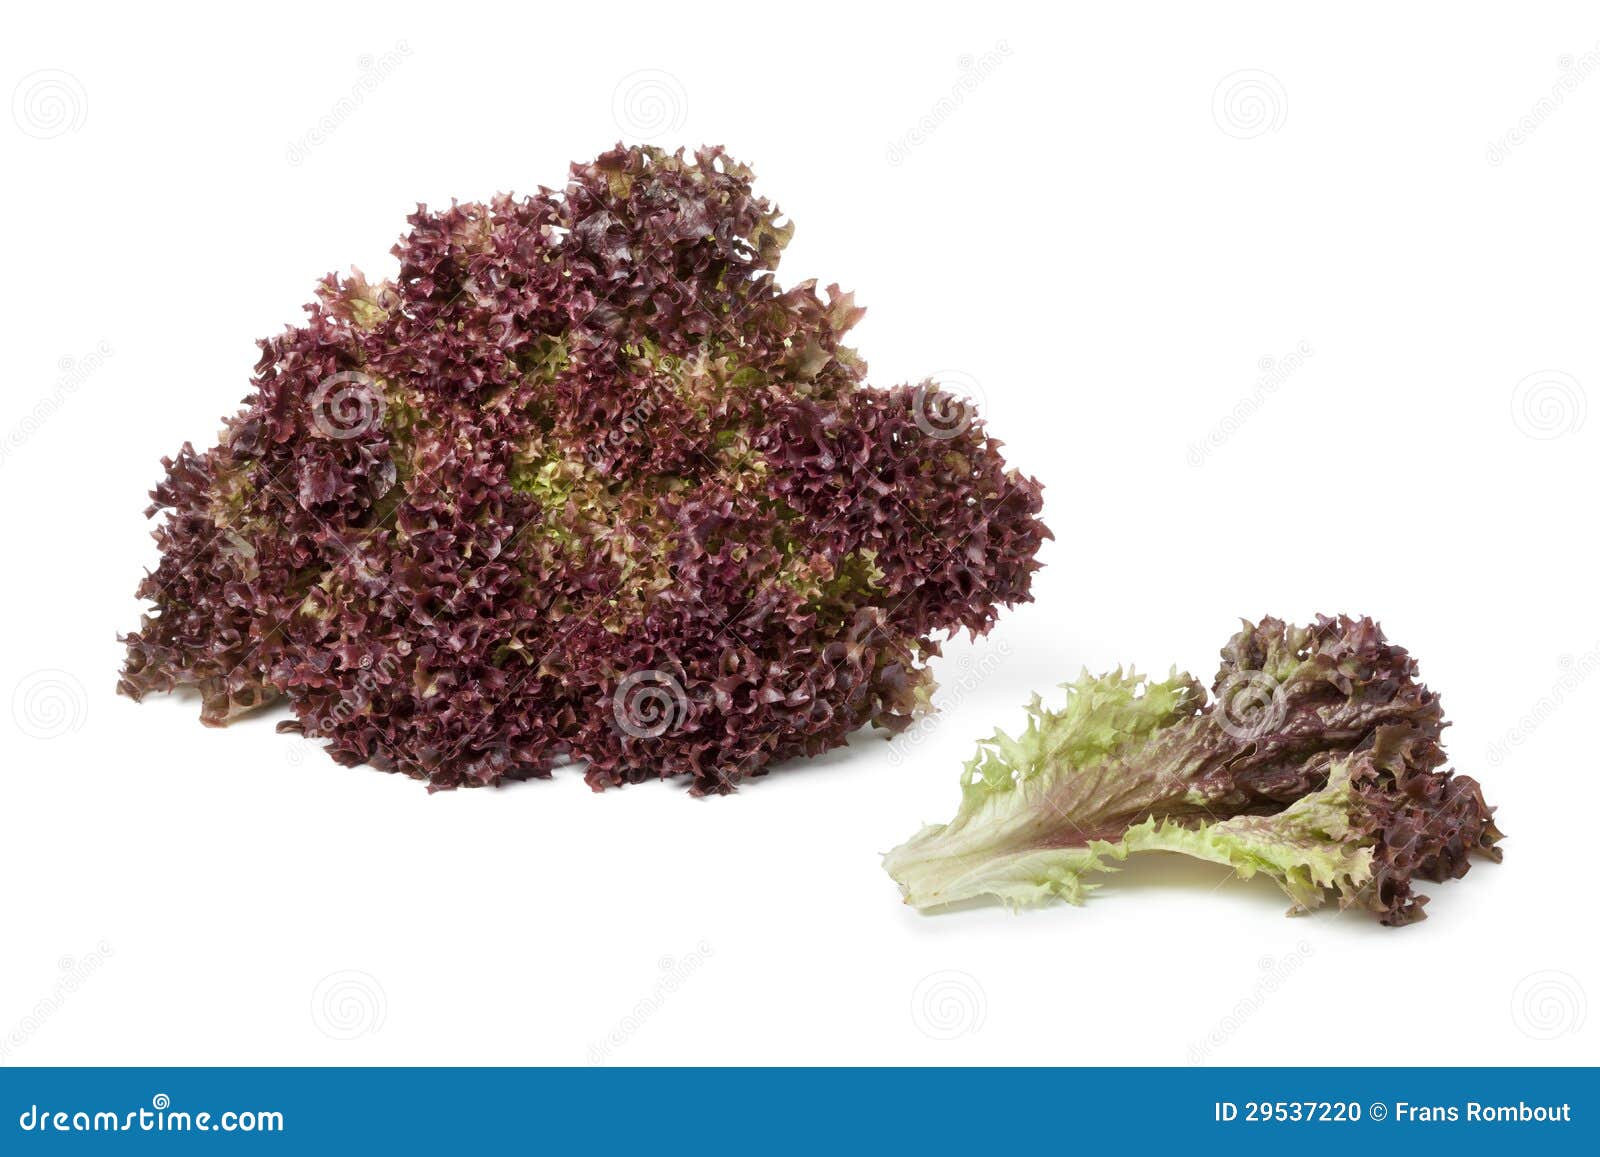 lollo rosso lettuce and a leaf